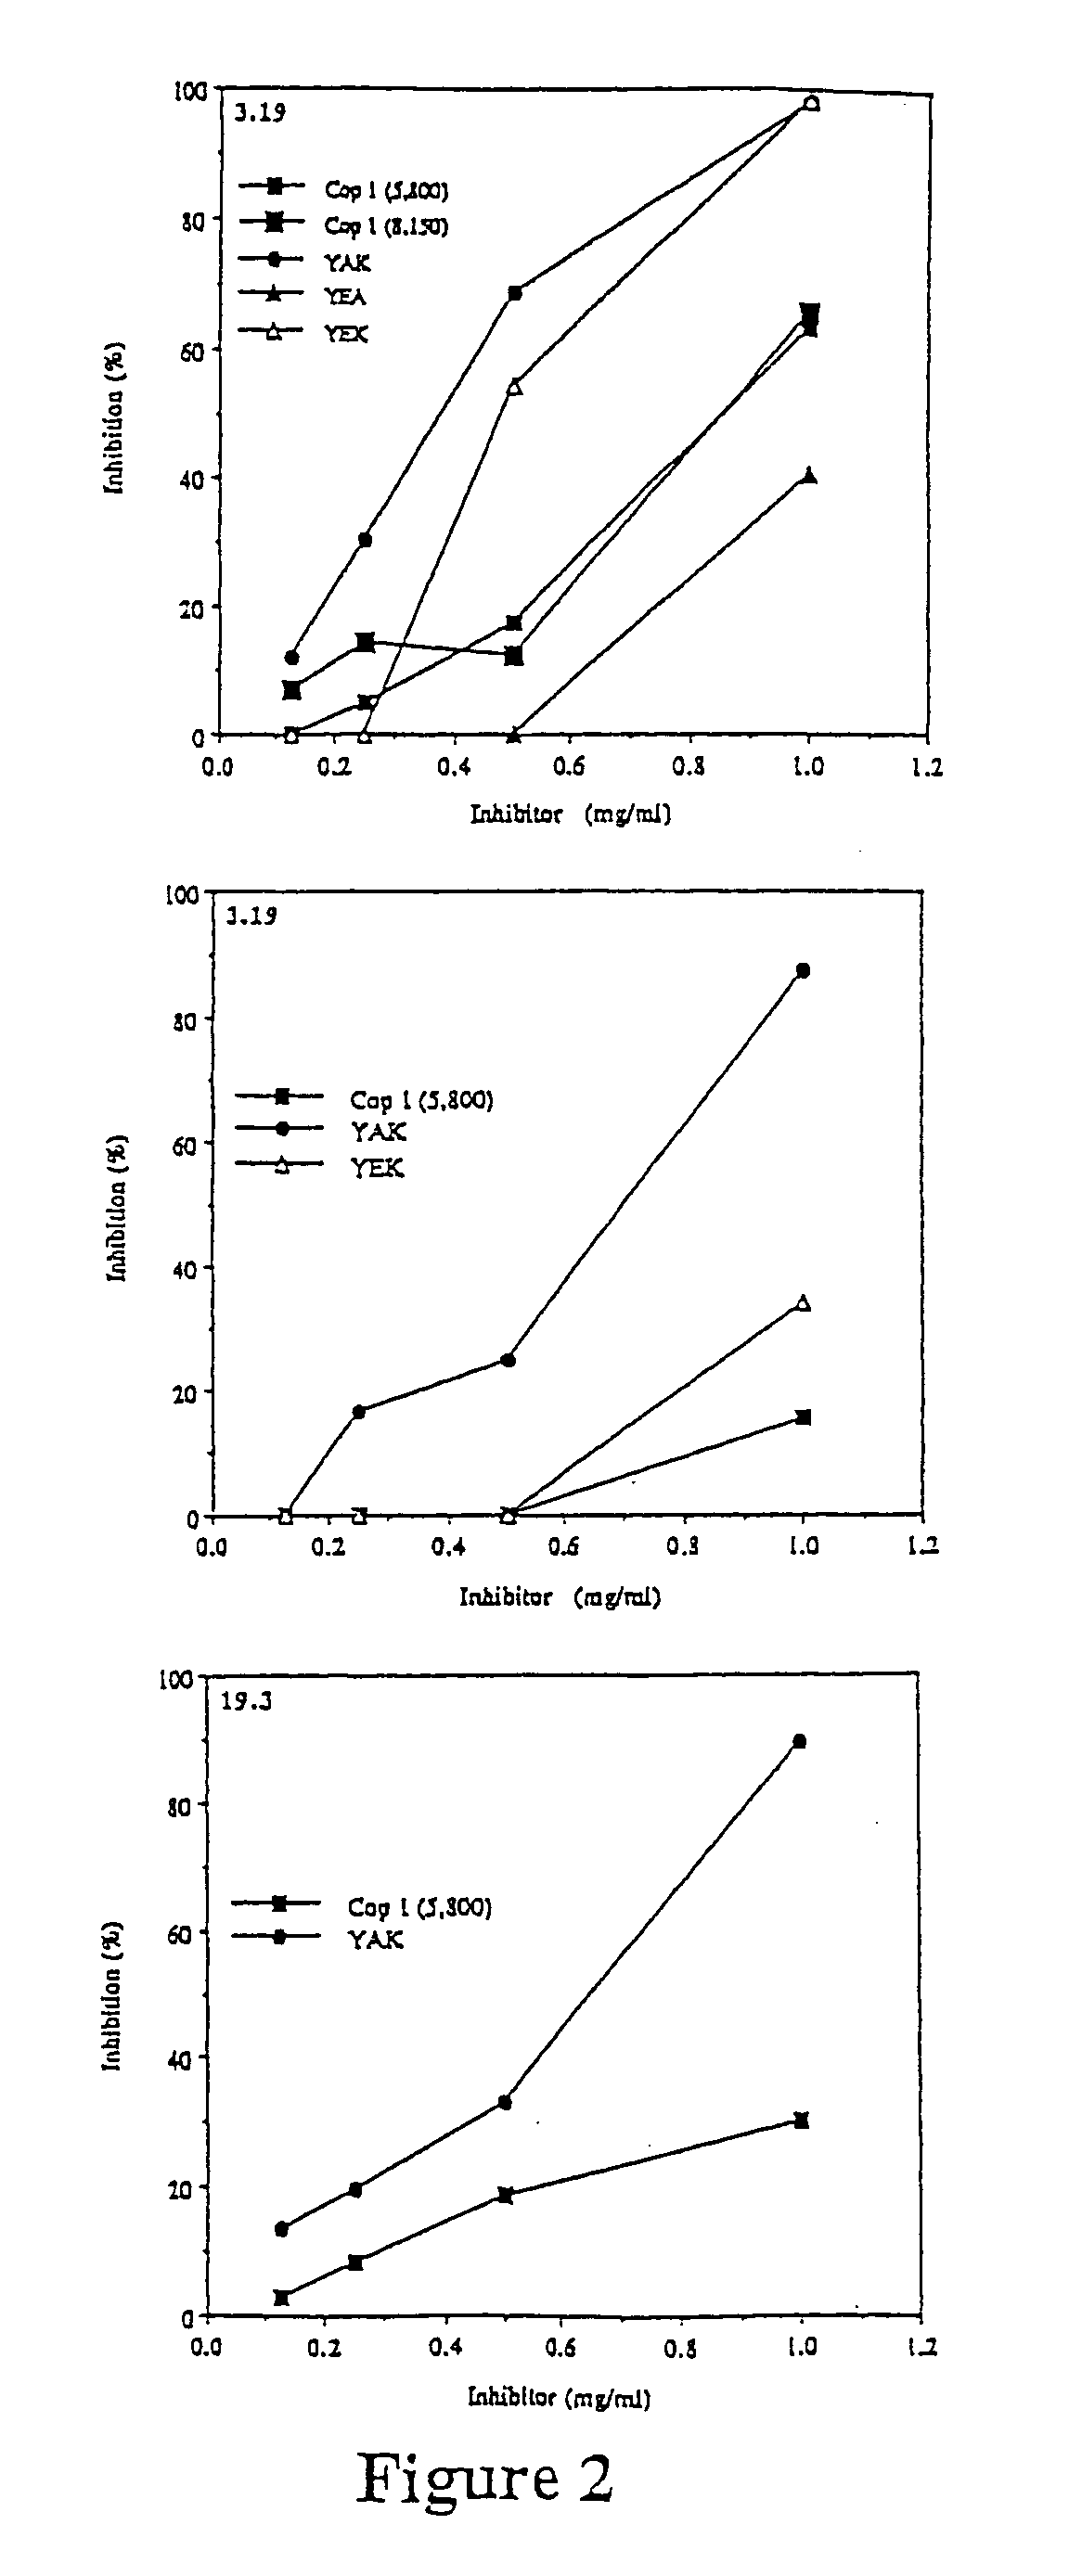 Treatment of autoimmune conditions with copolymer 1 and related copolymers